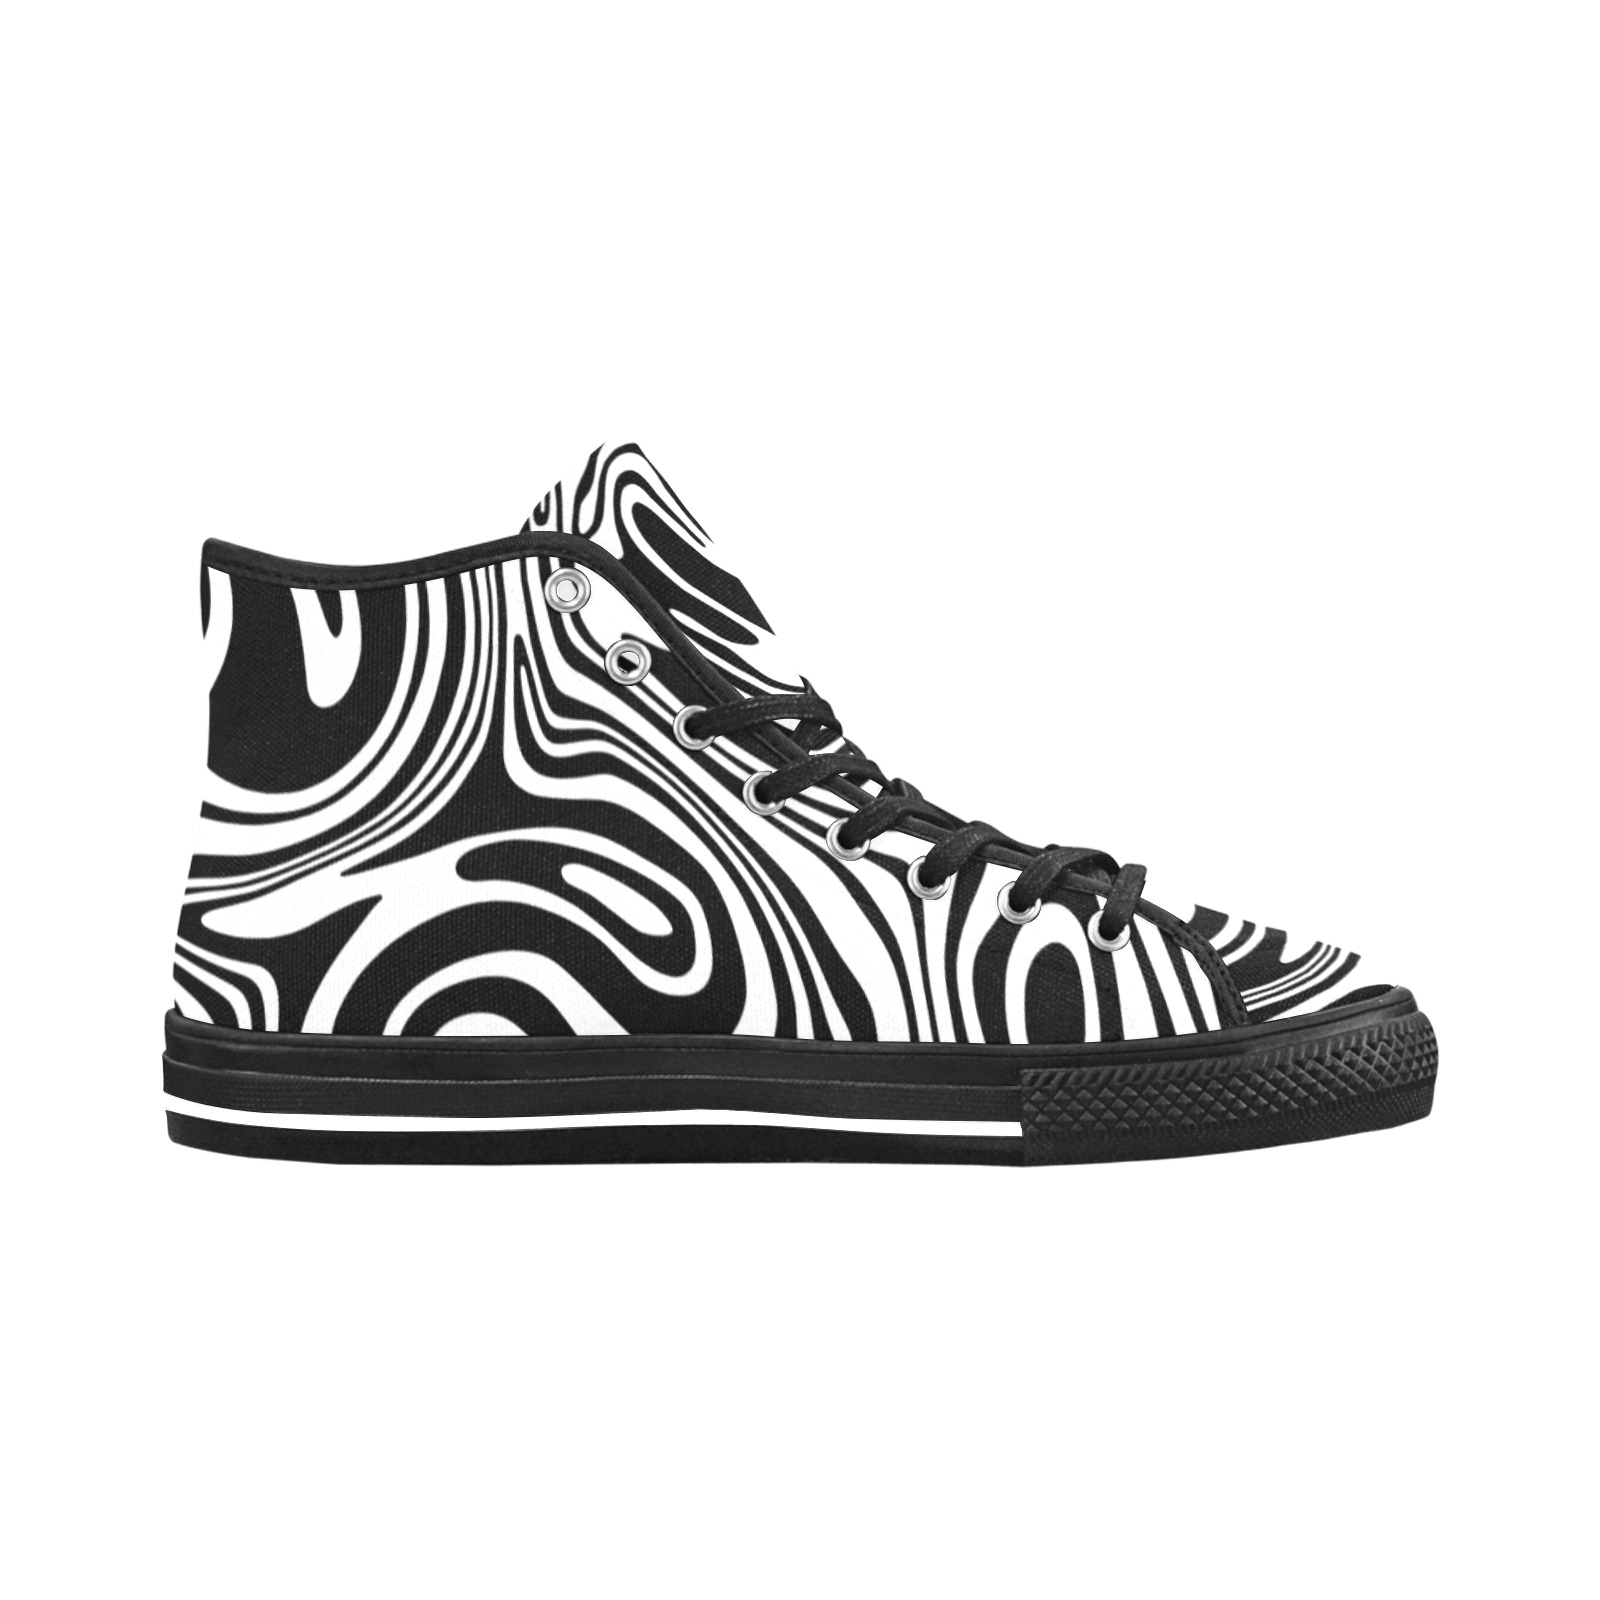 Black and White Marble Vancouver H Women's Canvas Shoes (1013-1)